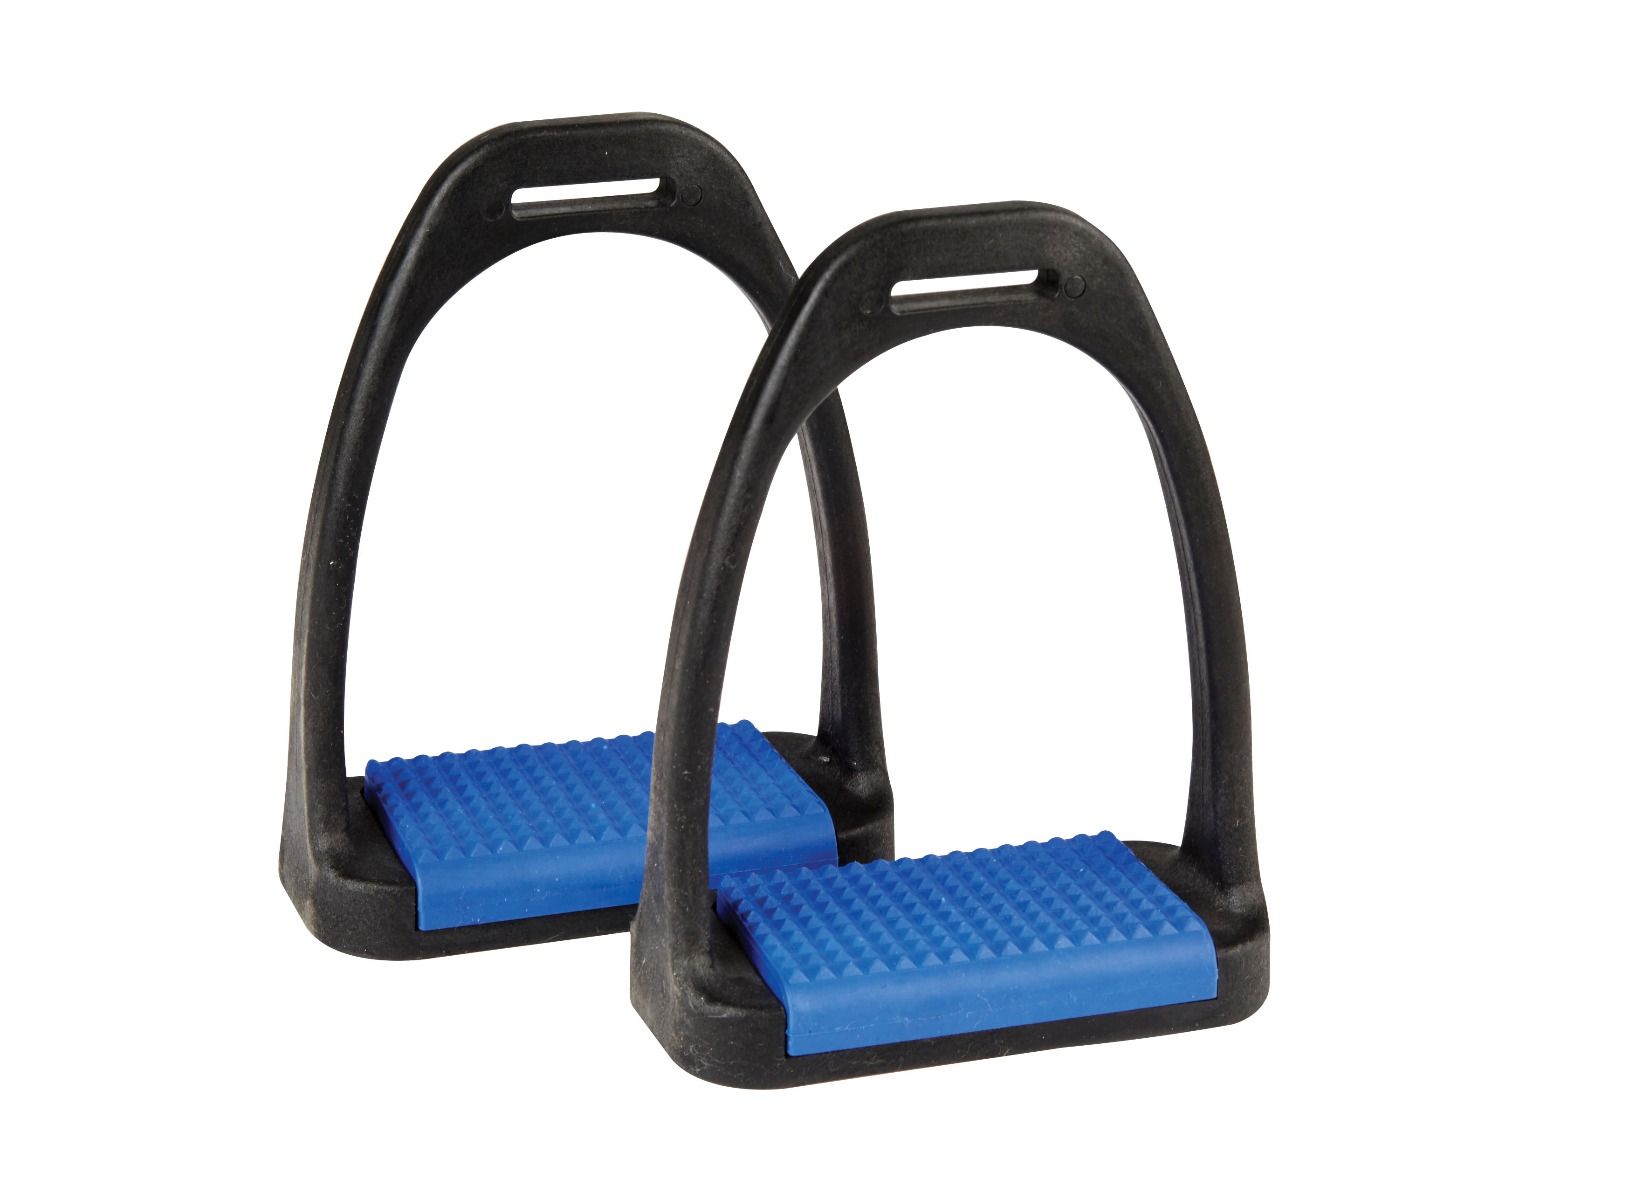 Korsteel Polymer Stirrup Irons With Coloured Treads